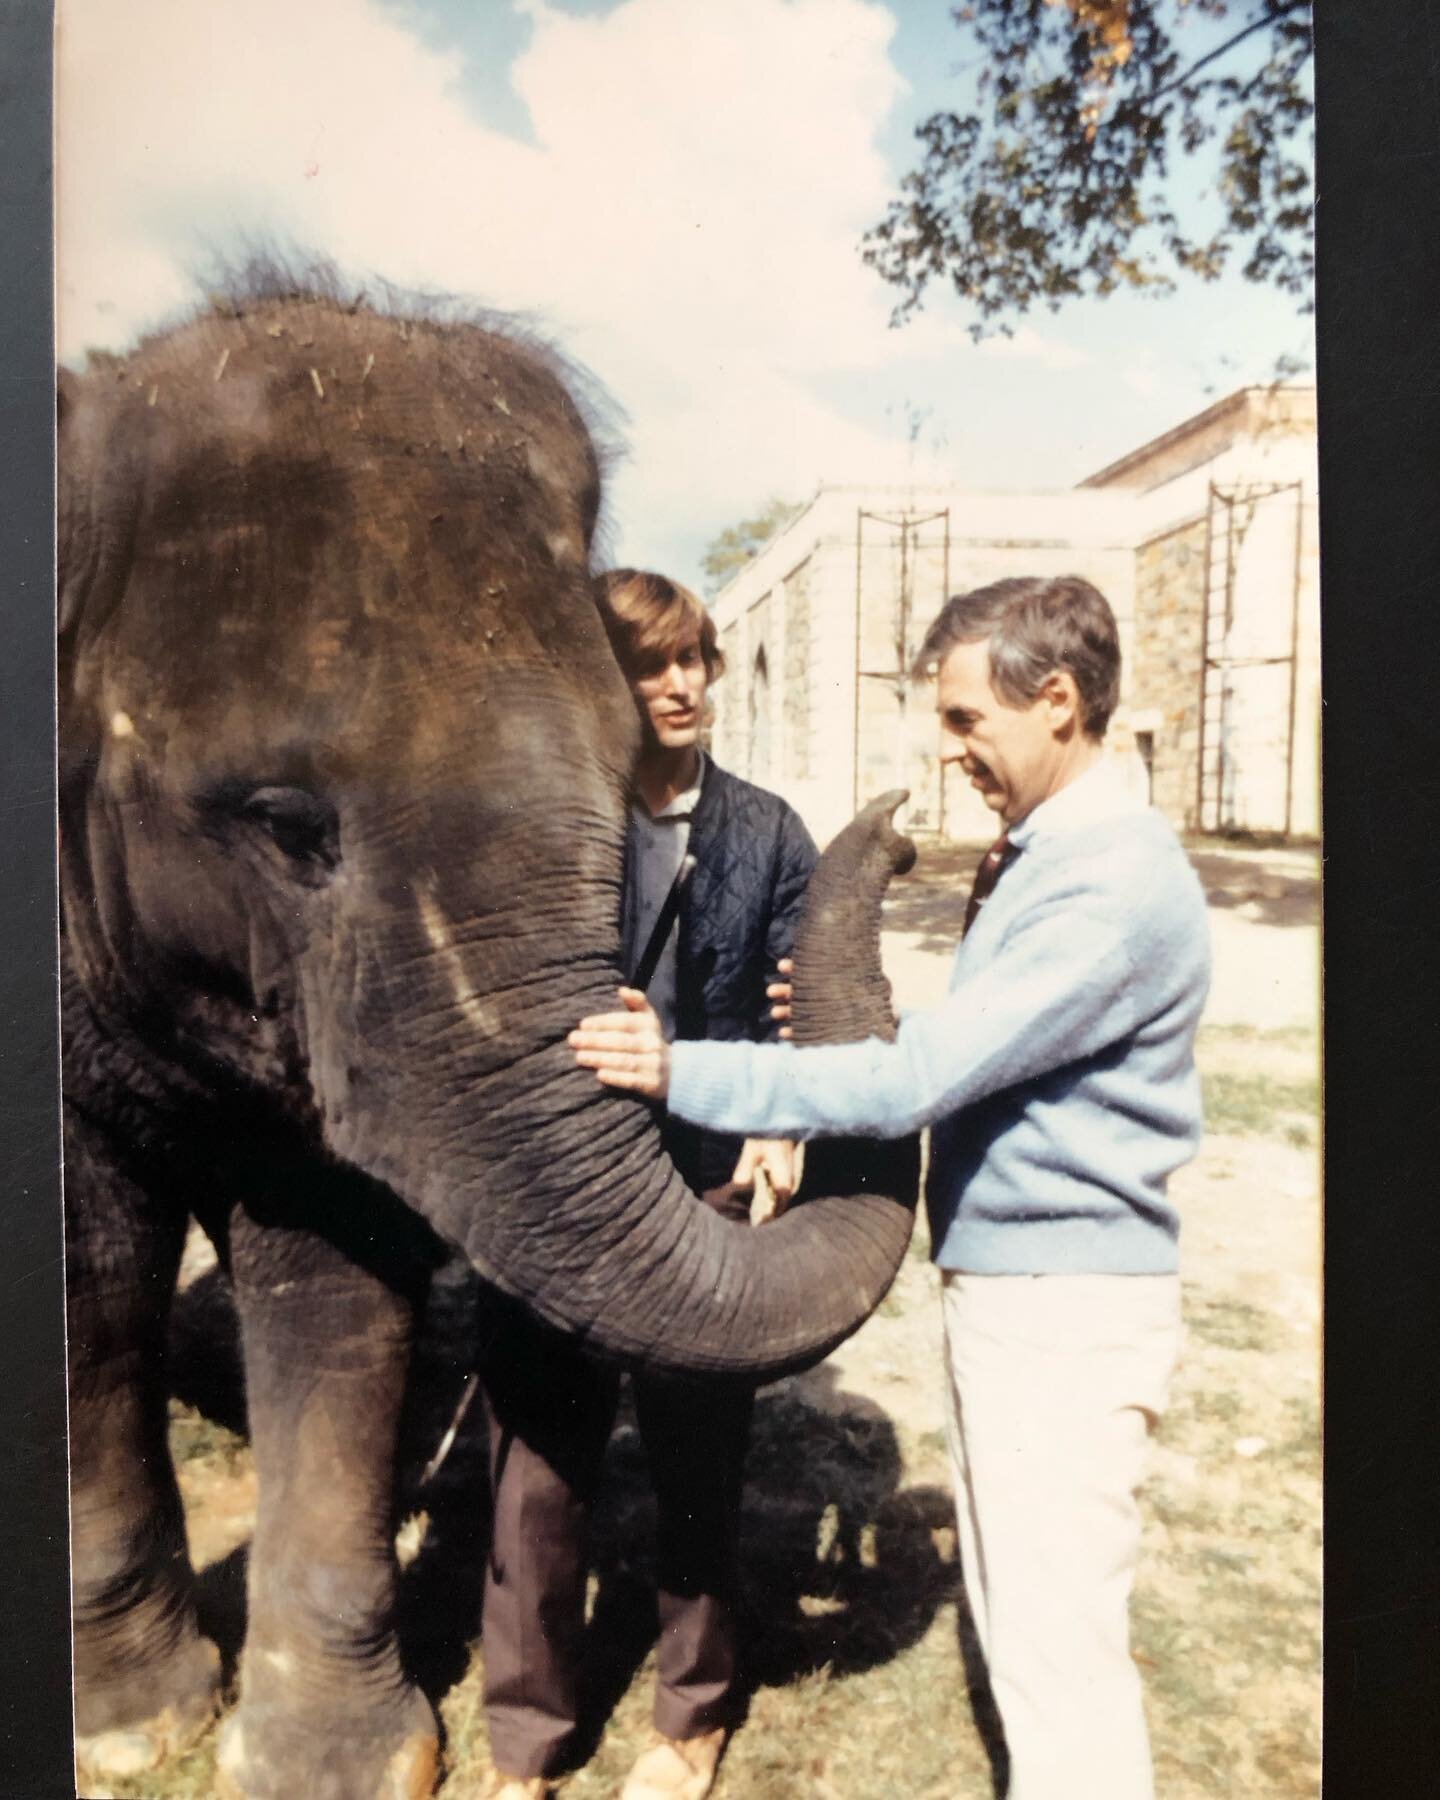 Here is a picture of Mister Rogers and my dad at the National zoo for your viewing pleasure.